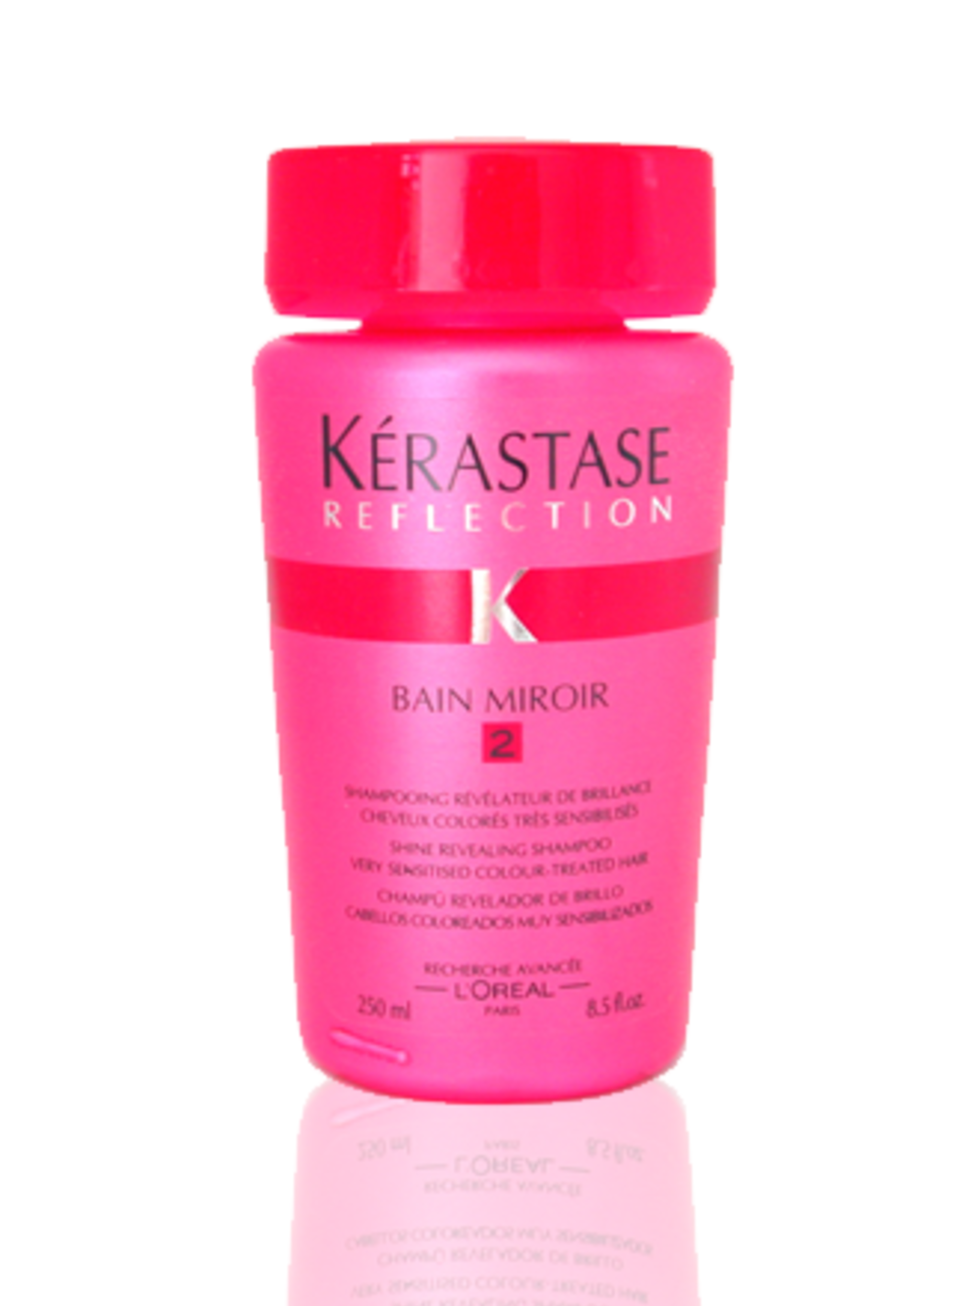 <p>Reflection Bain Miroir, £11.05 by Kerastase at <a href="http://www.hqhair.com/code/products.asp?PageID=96&amp;SectionID=534&amp;FeaturedID=3705&amp;FeaturedProduct=5174&amp;pID=1">HQhair</a></p><p>Kates hair is fine and fly away, plus, constant stylin